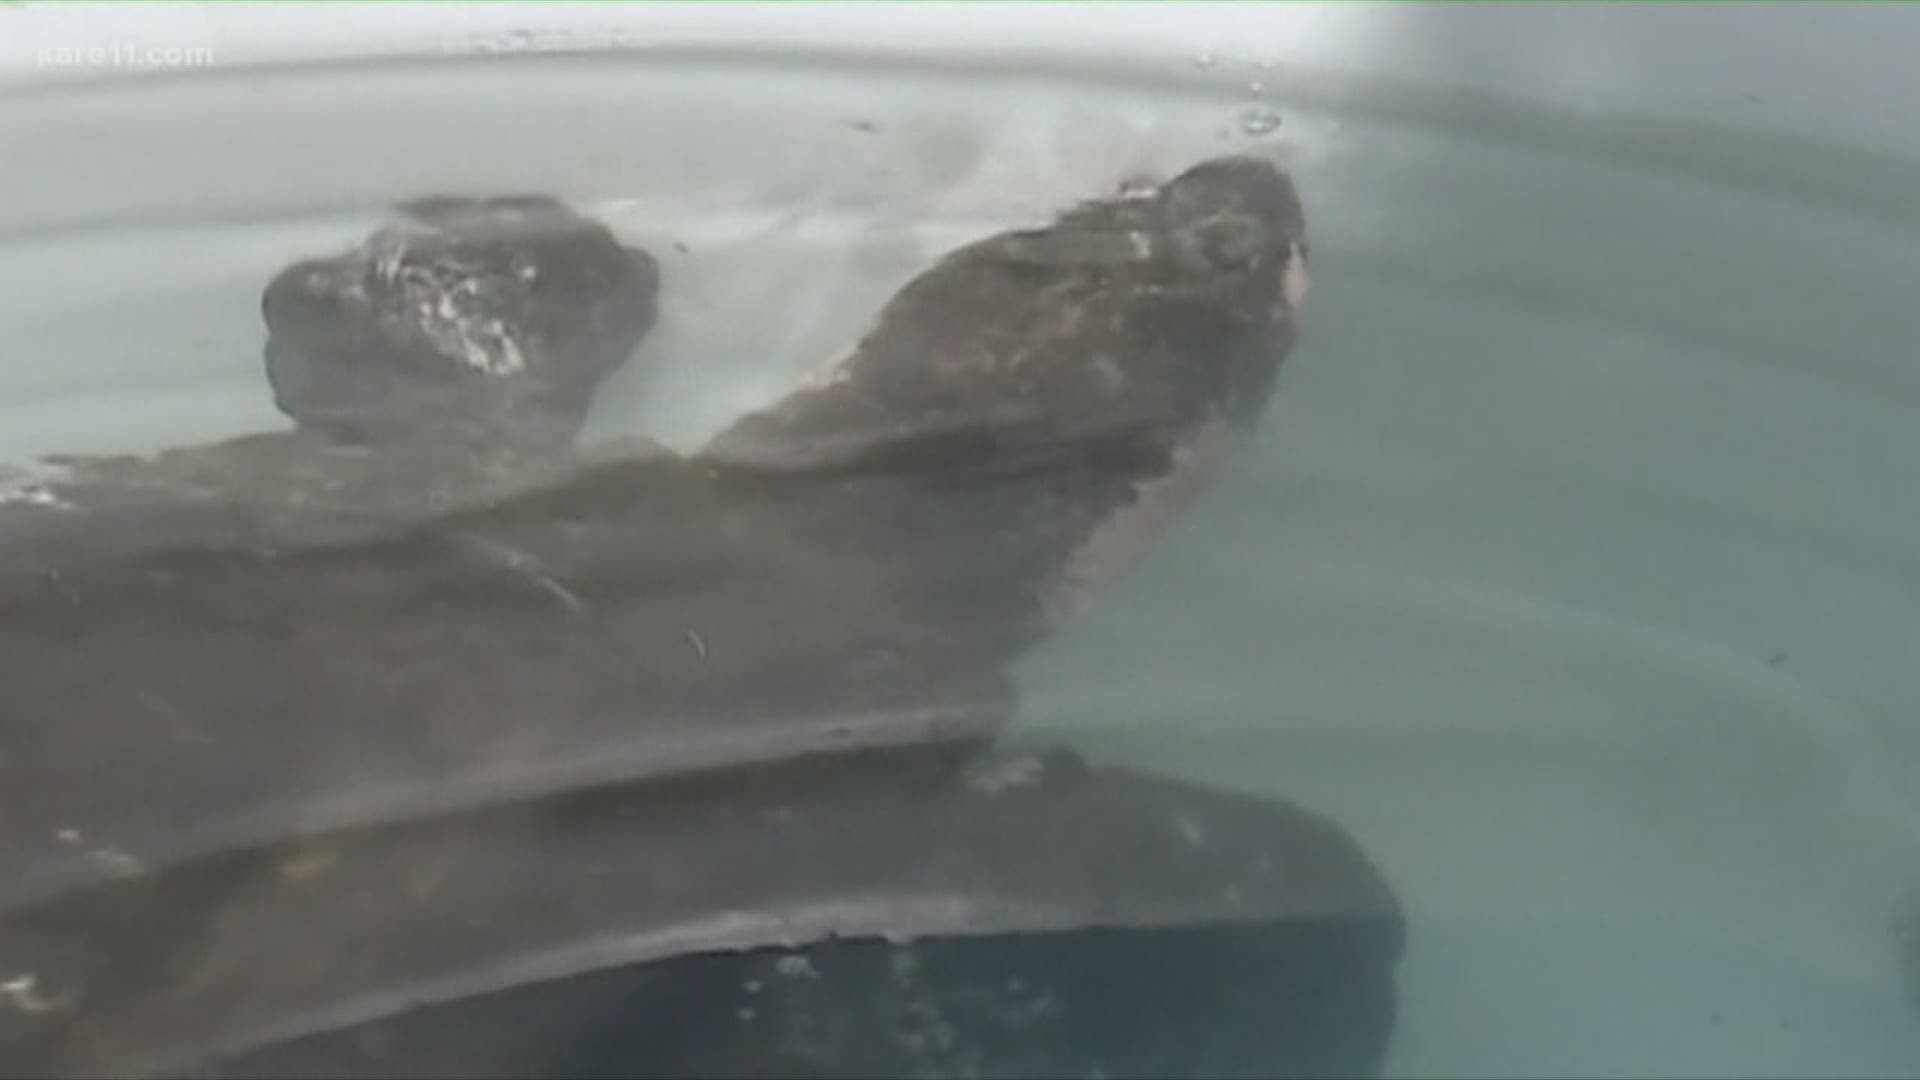 There are only a handful of Yangtze turtles left in the world. The only known female Yangtze turtle has died at a zoo in southern China, officials said Sunday. https://kare11.tv/2VIXcJg